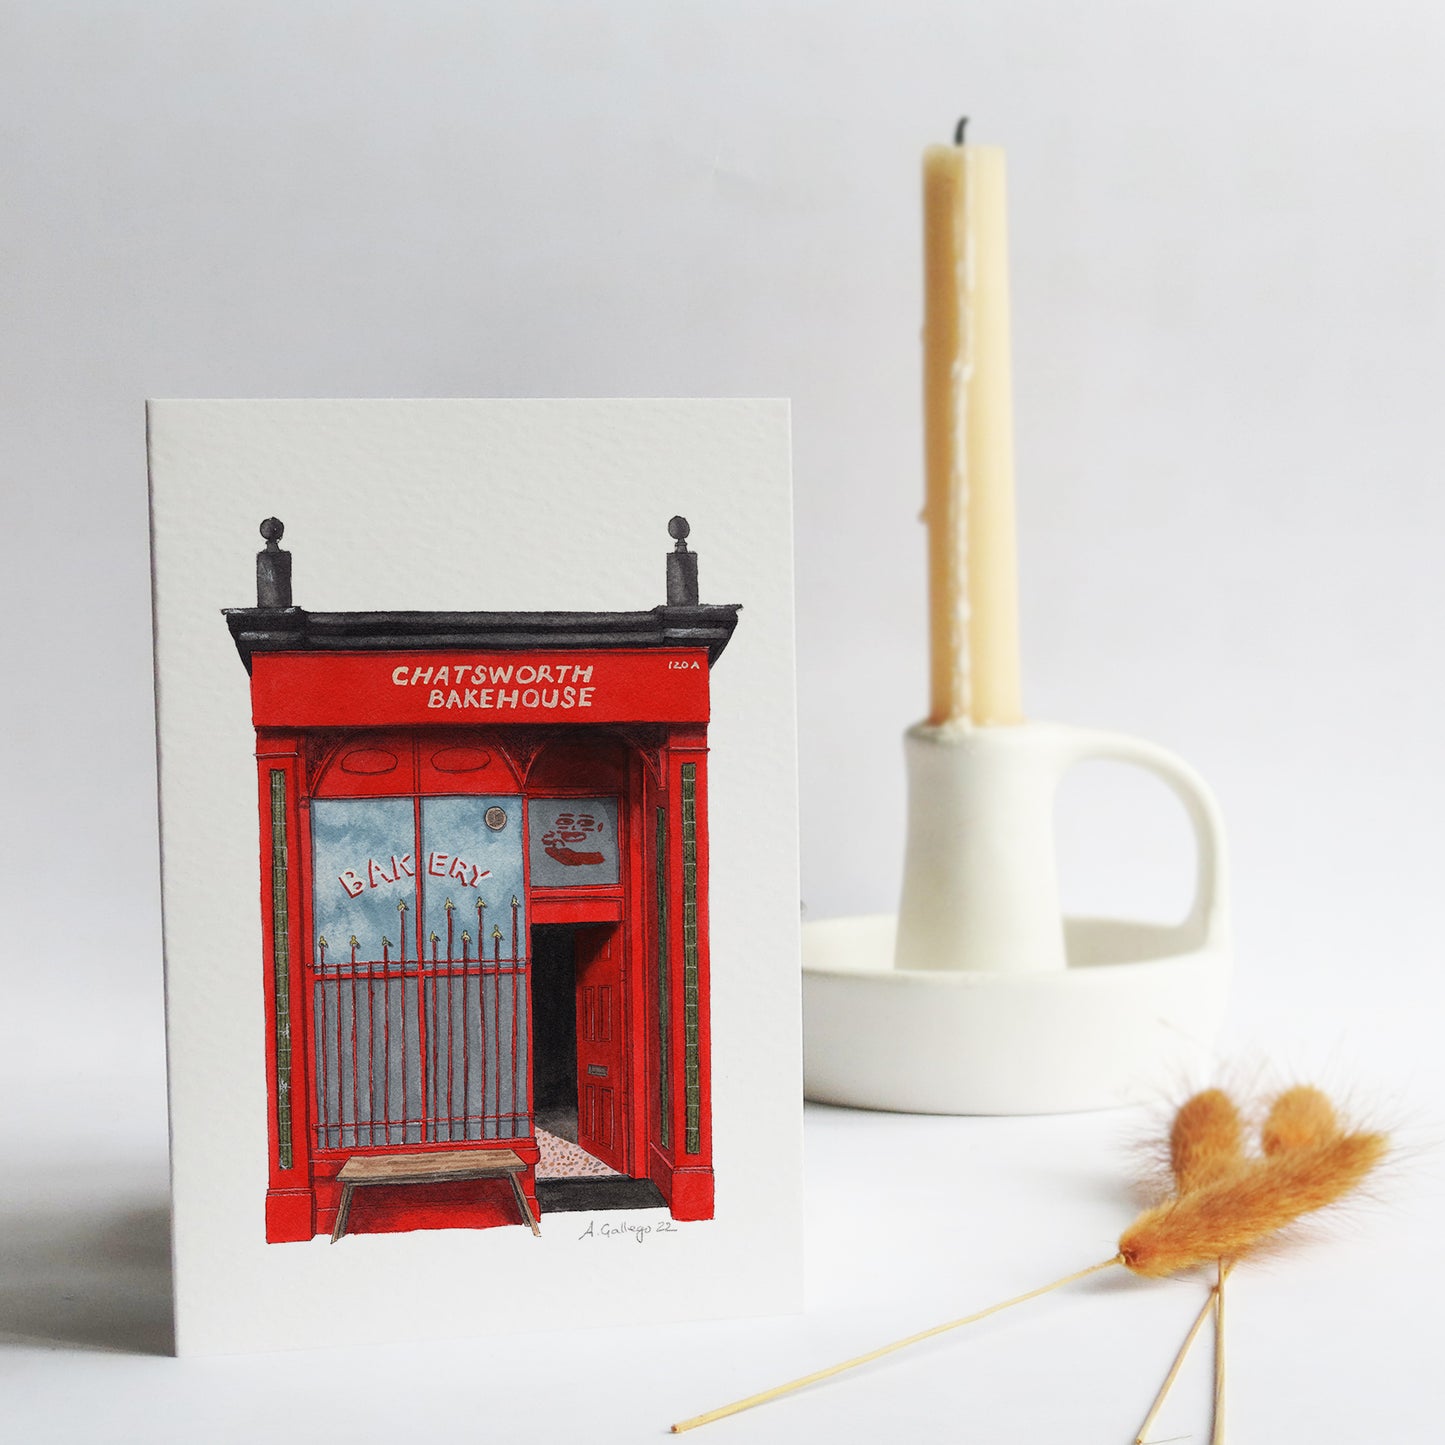 Crystal Palace - Chatsworth Bakehouse - Greeting card with envelope